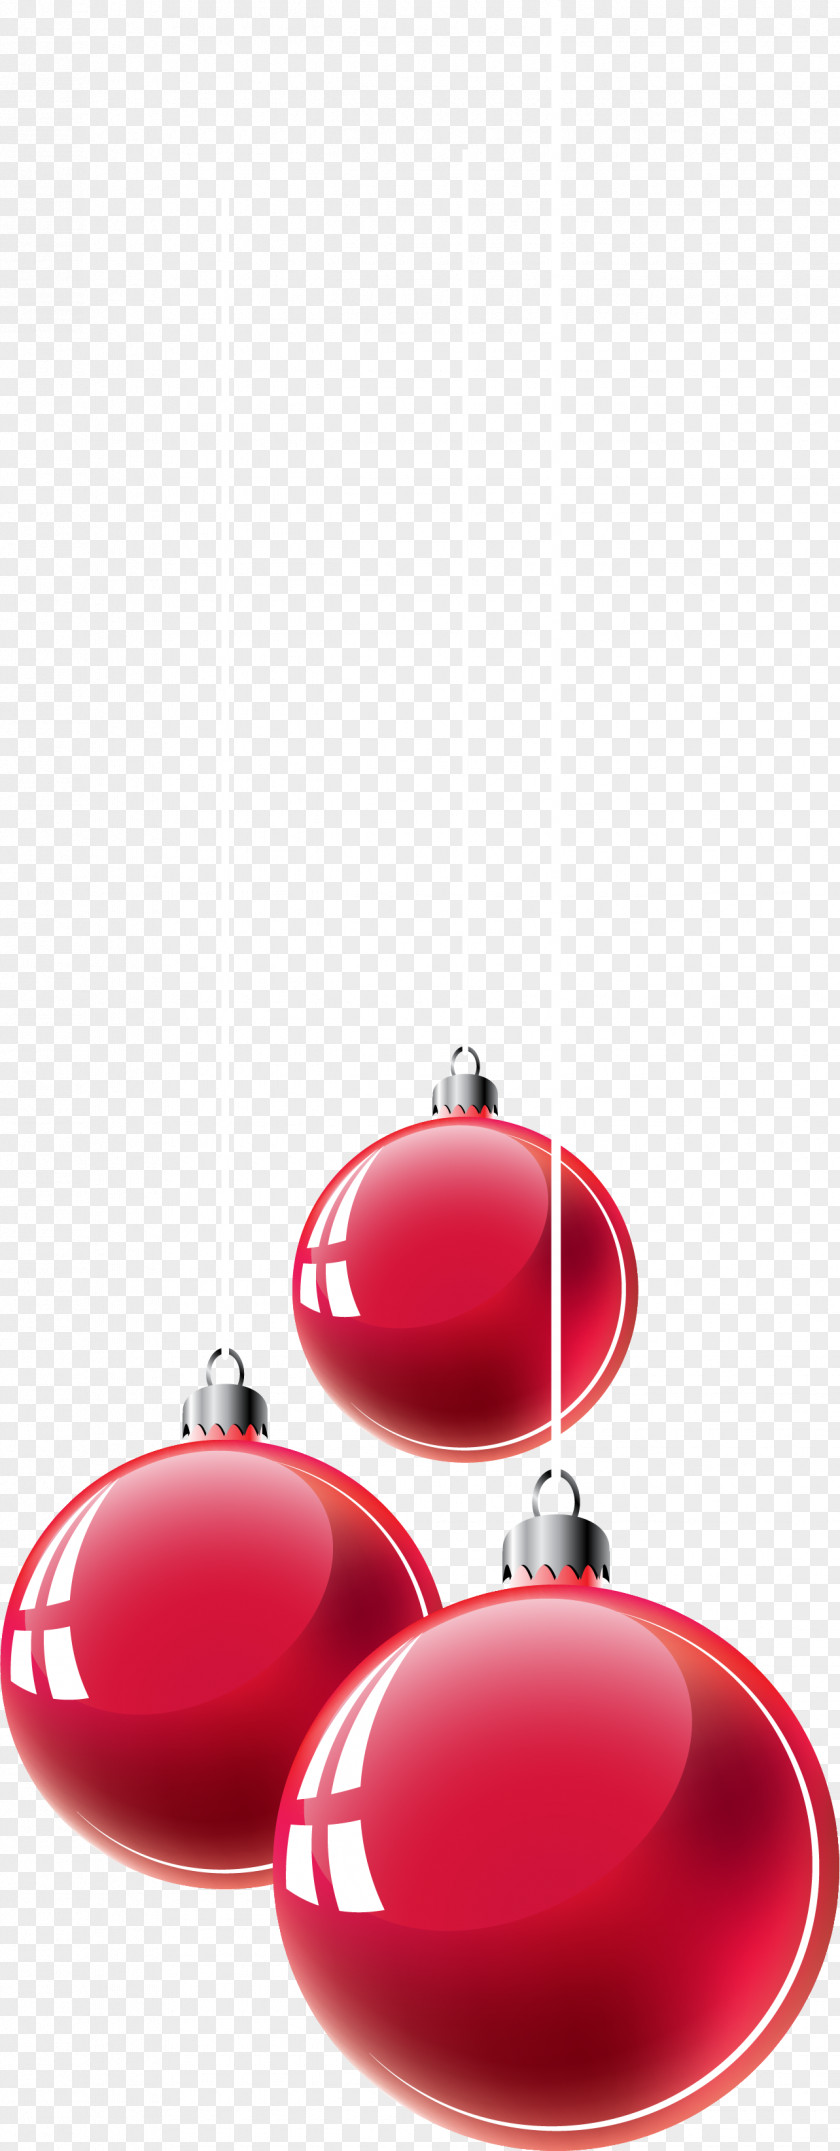 Simple Red Ball Christmas Ornament PNG